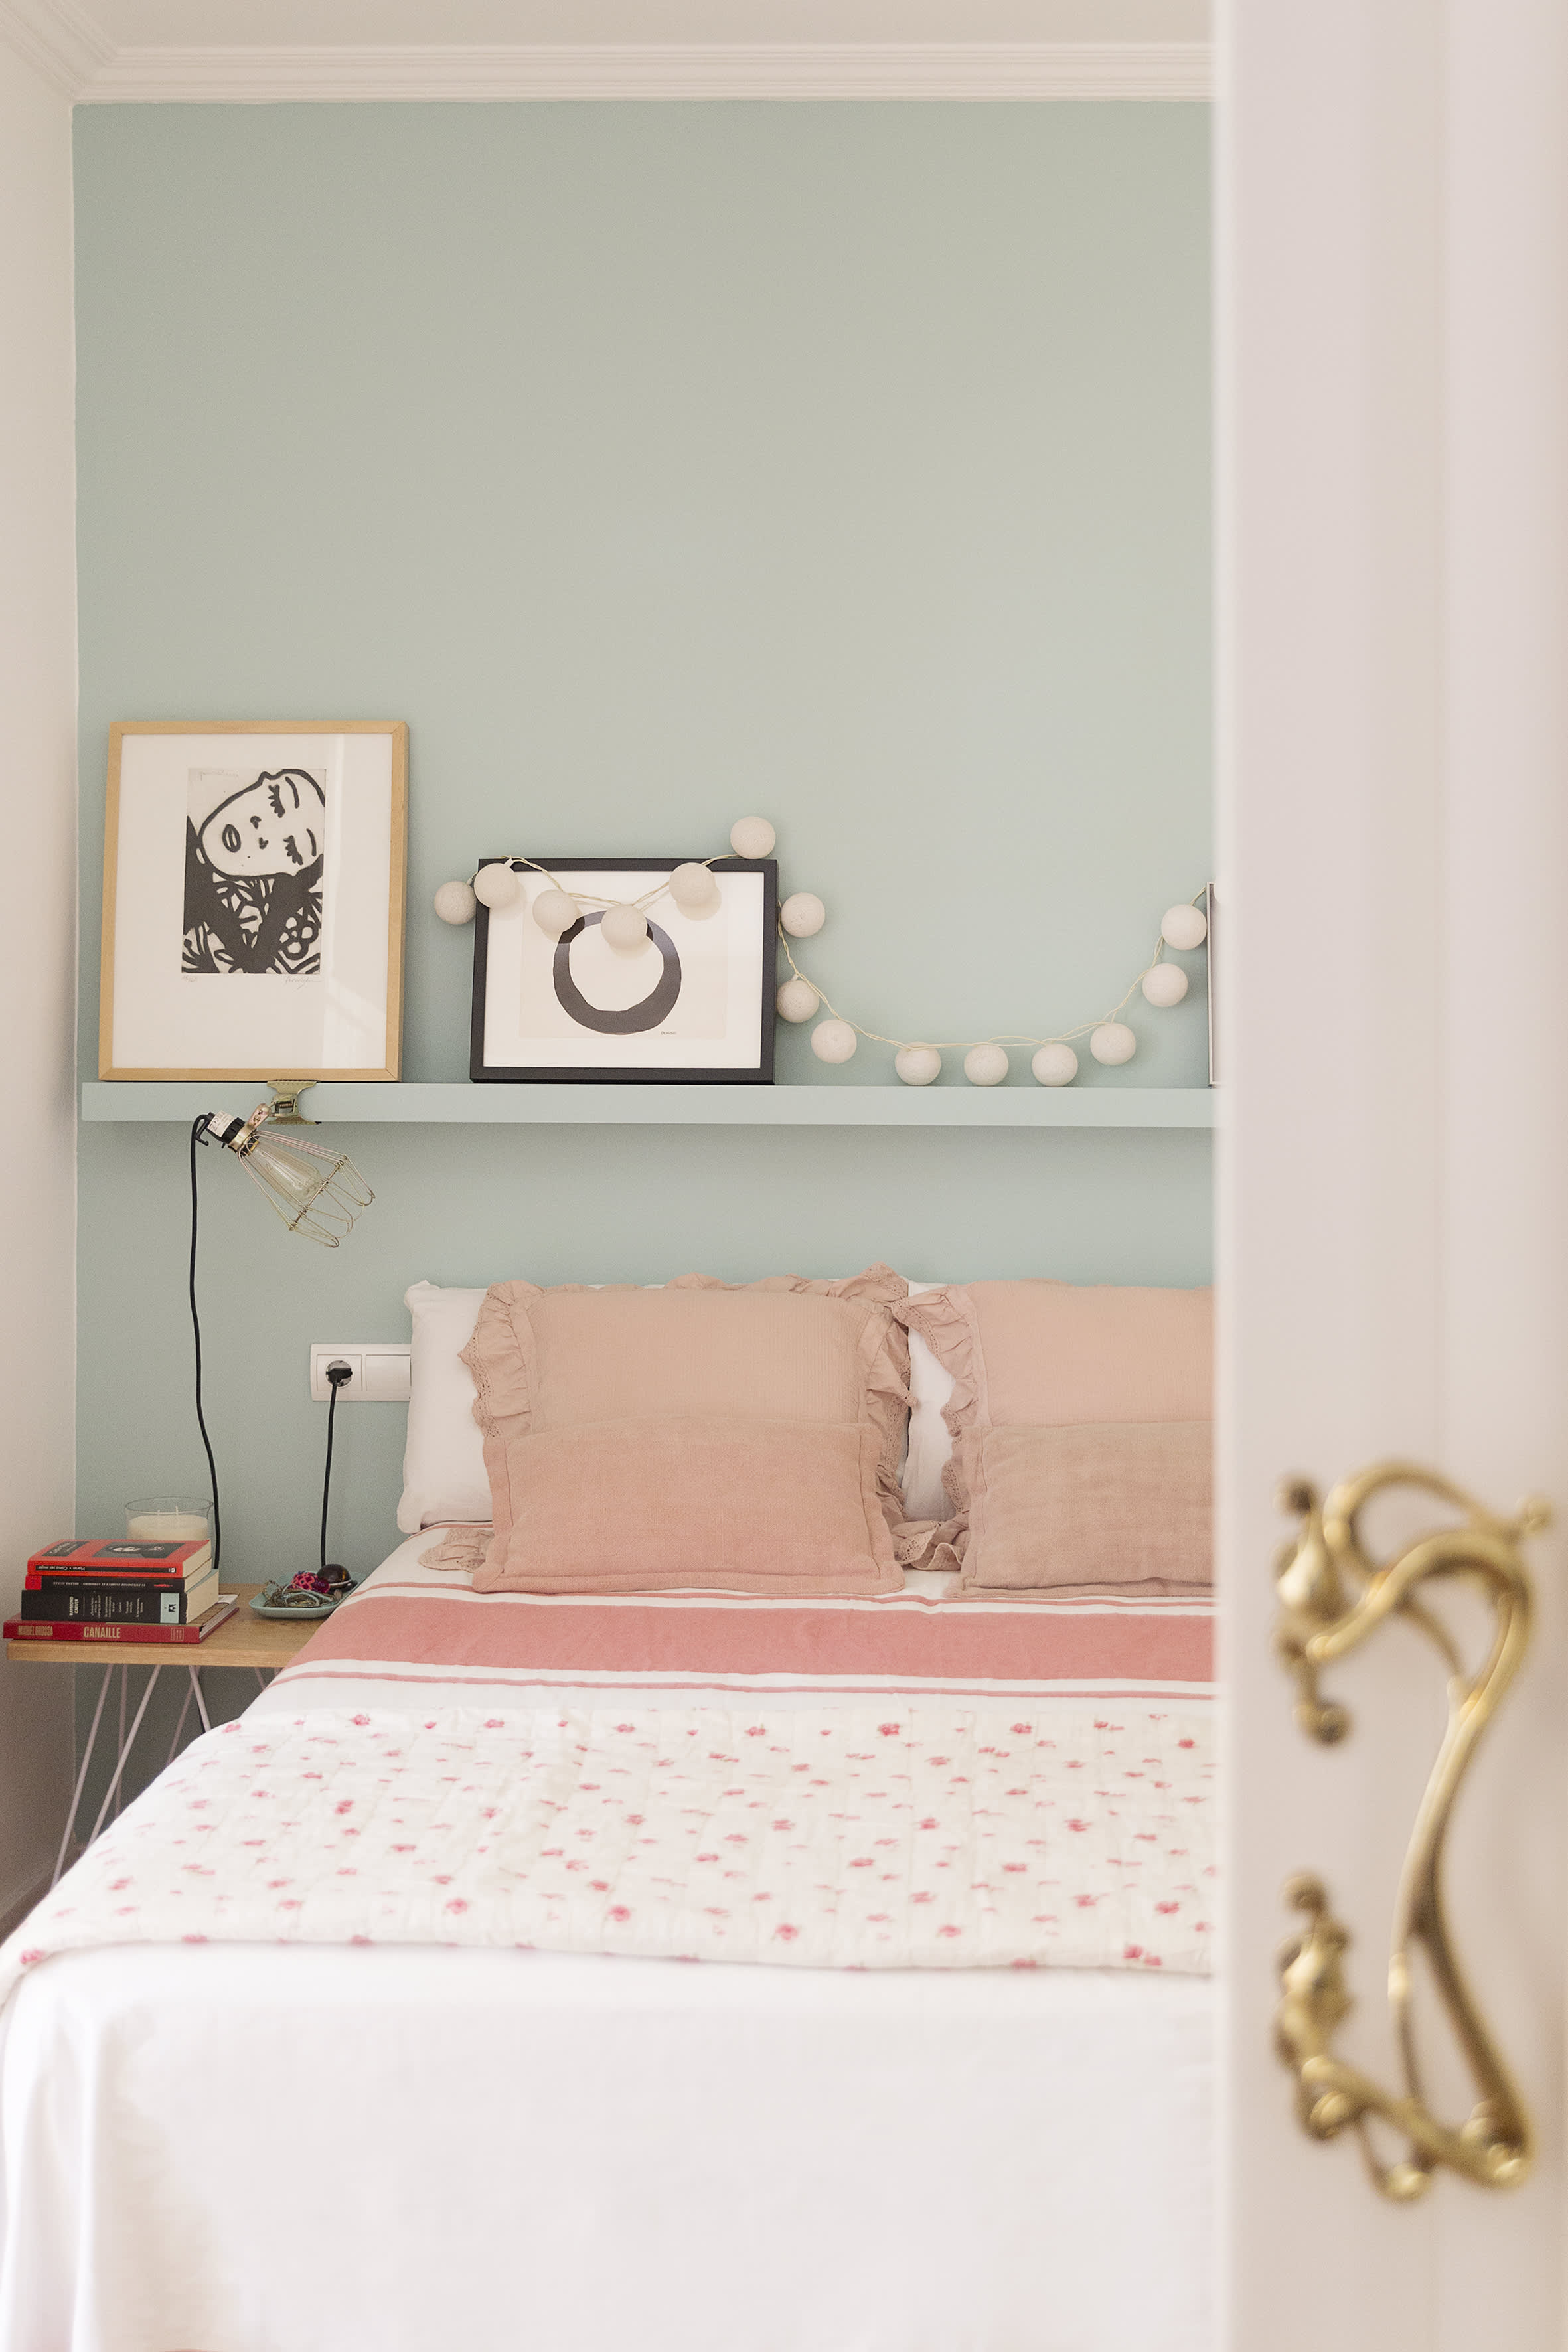 Teal Bedroom Ideas: The Best Paint Colors to Achieve Dramatic Style